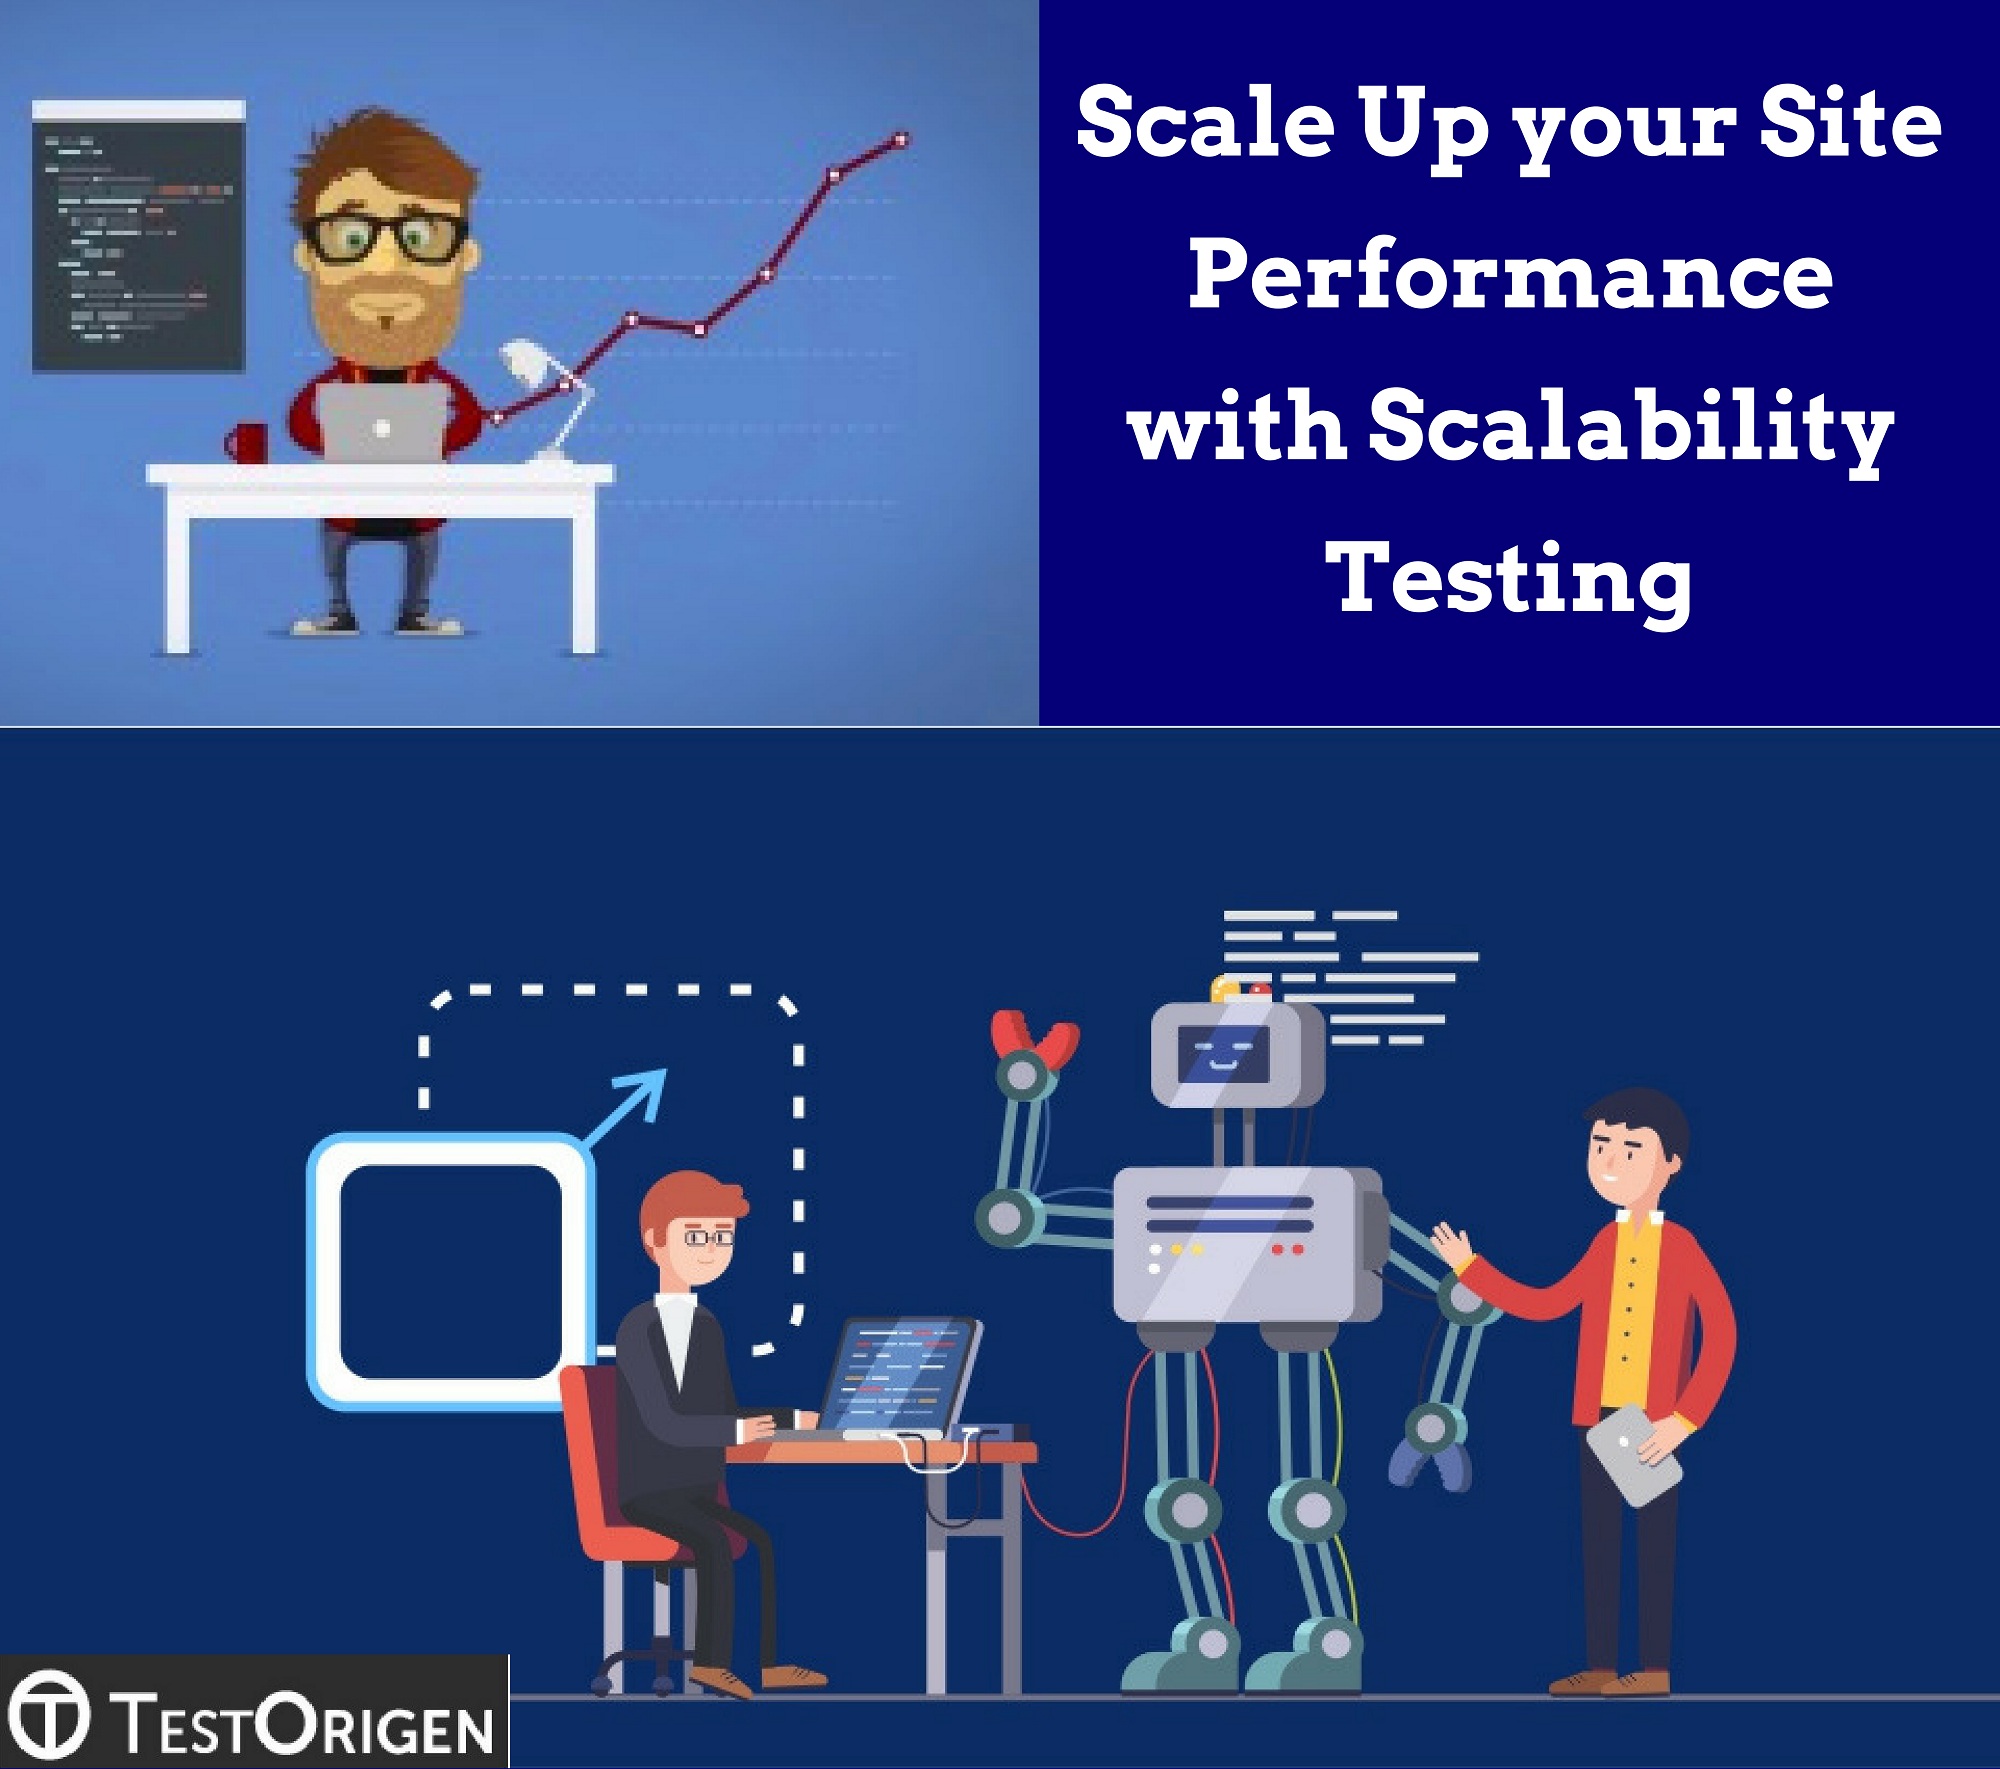 Scale up your site performance with Scalability Testing